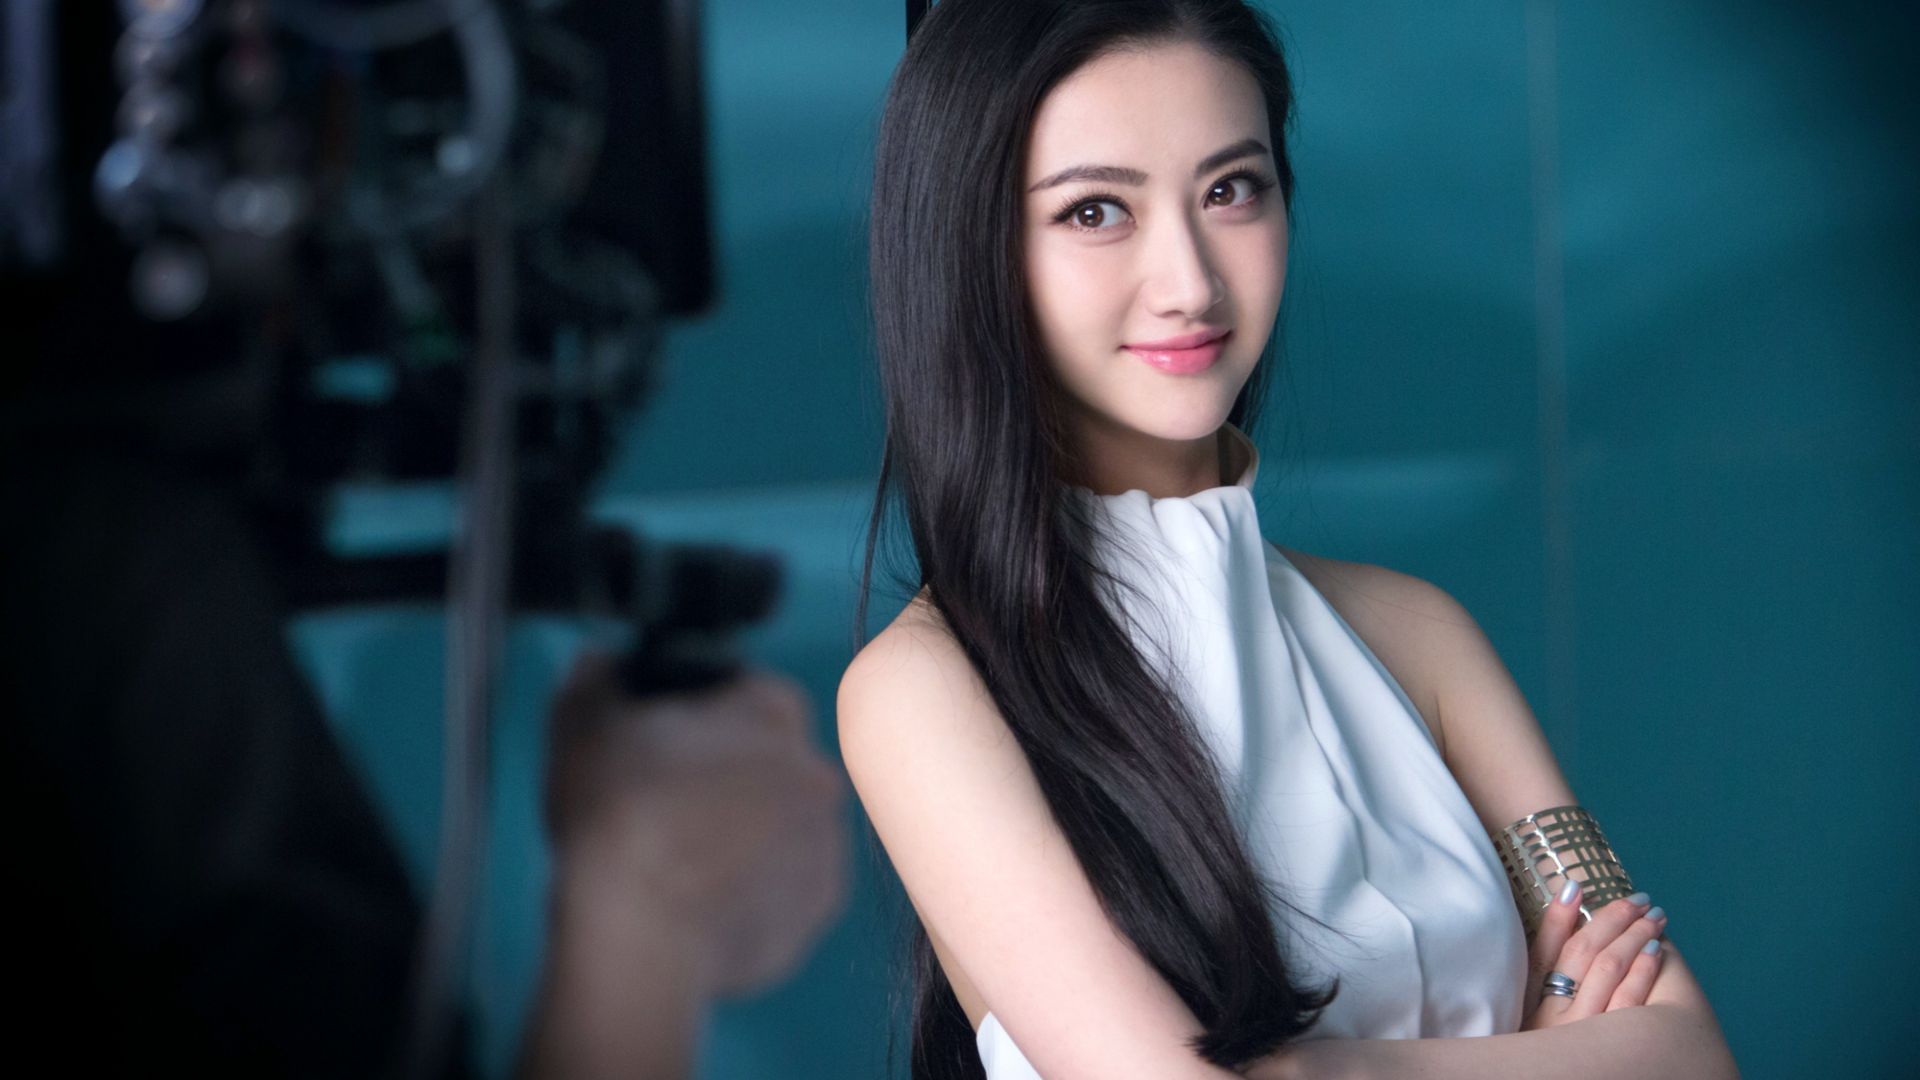 Wallpaper Jing Tian, Chinese actress, Asian celebrity, celebrity, smile